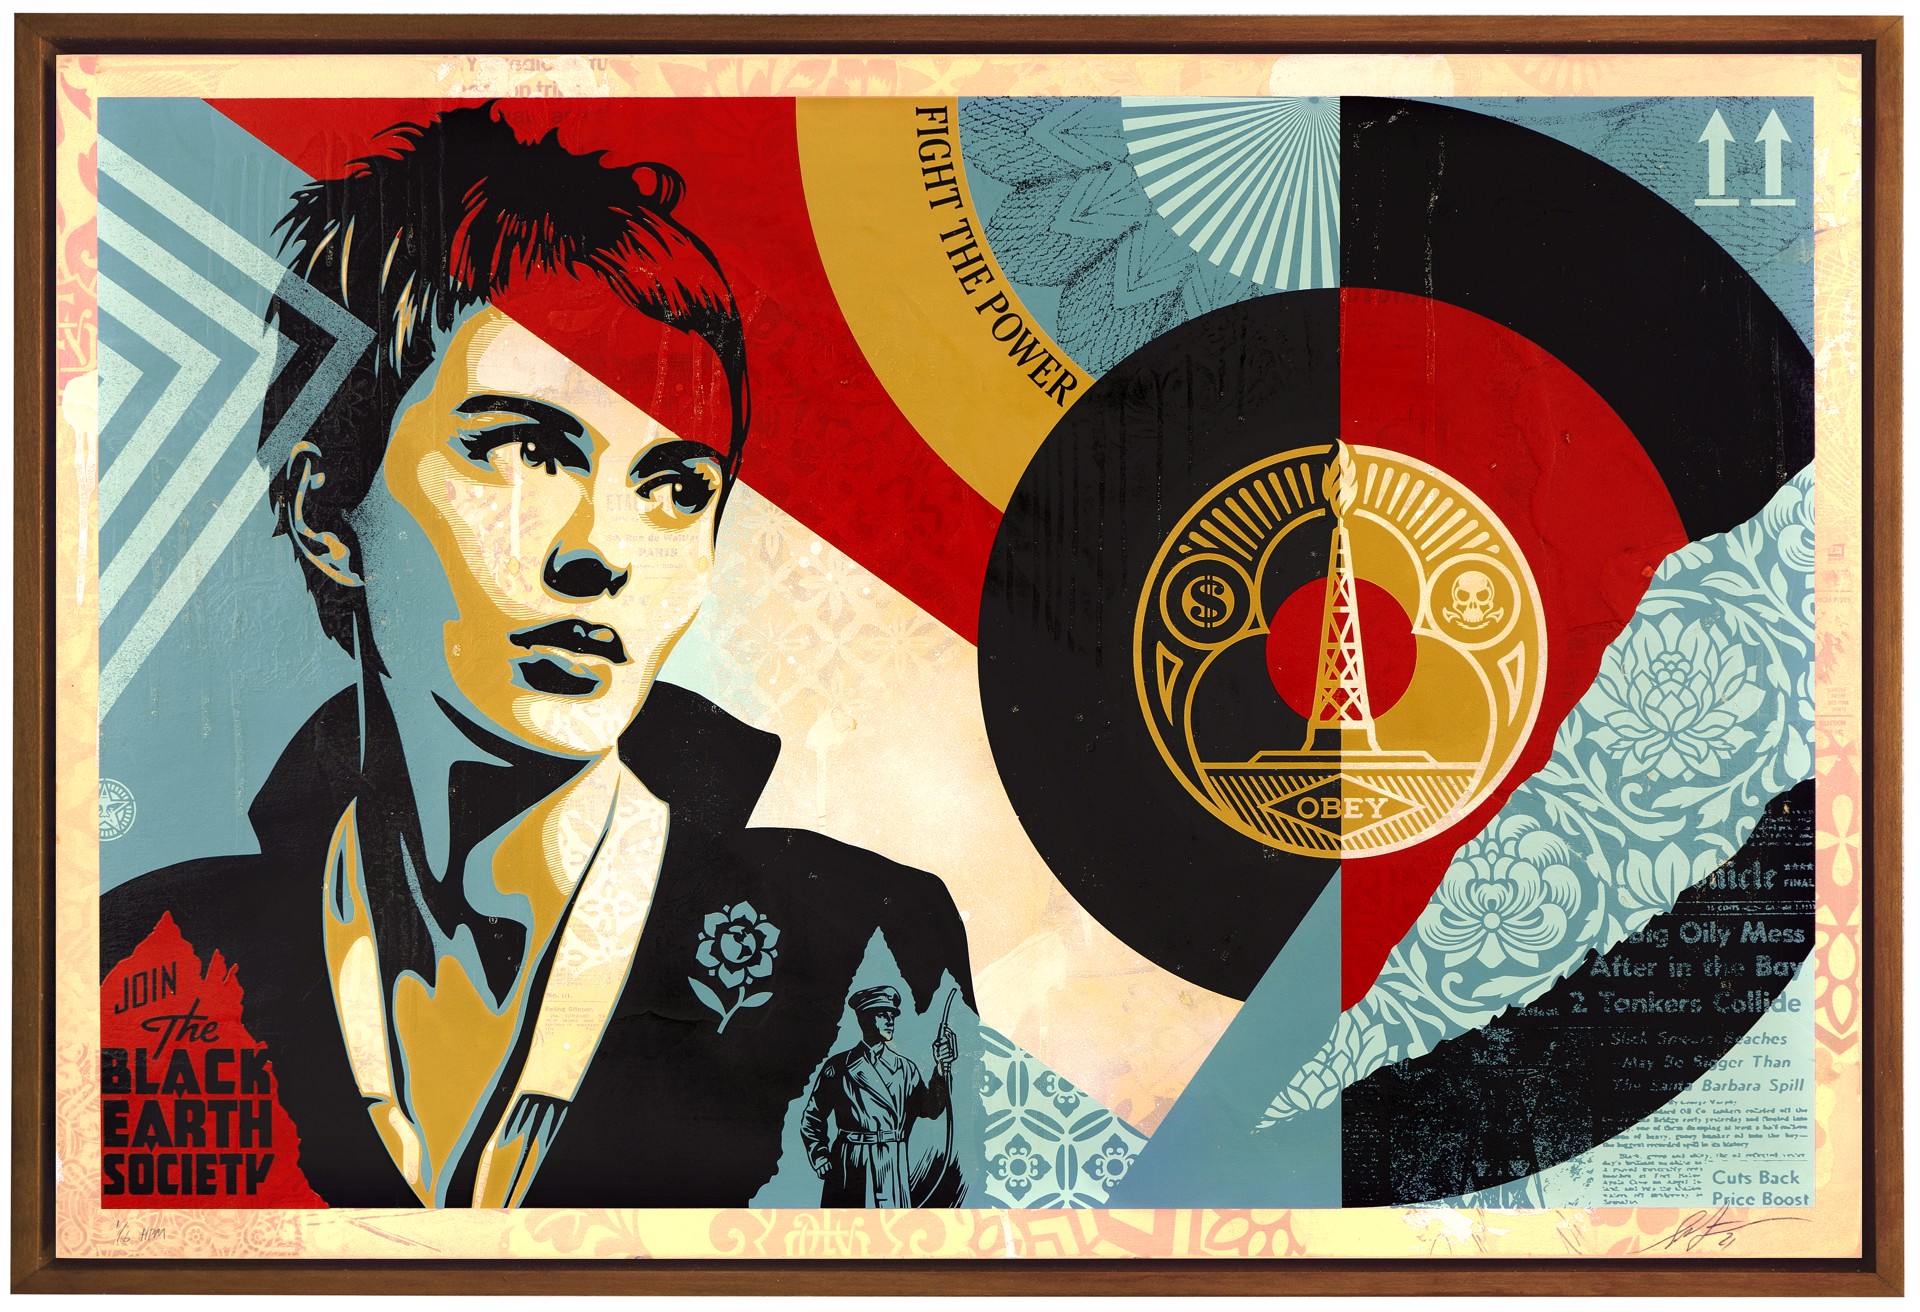 Black Earth Society by Shepard Fairey / Limited editions